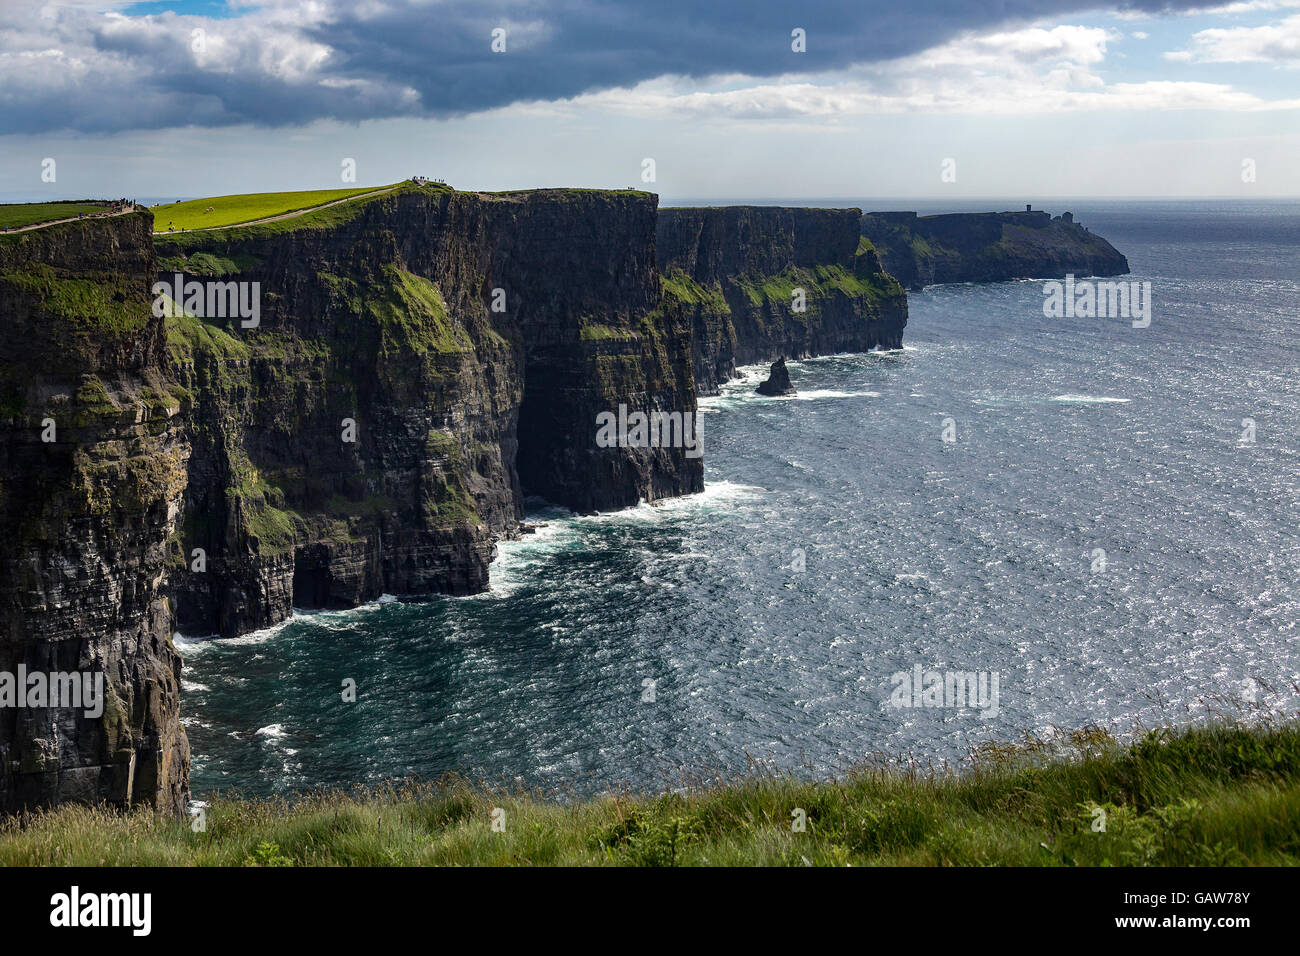 The Cliffs of Moher - located at the southwestern edge of the Burren region in County Clare, Ireland. Stock Photo